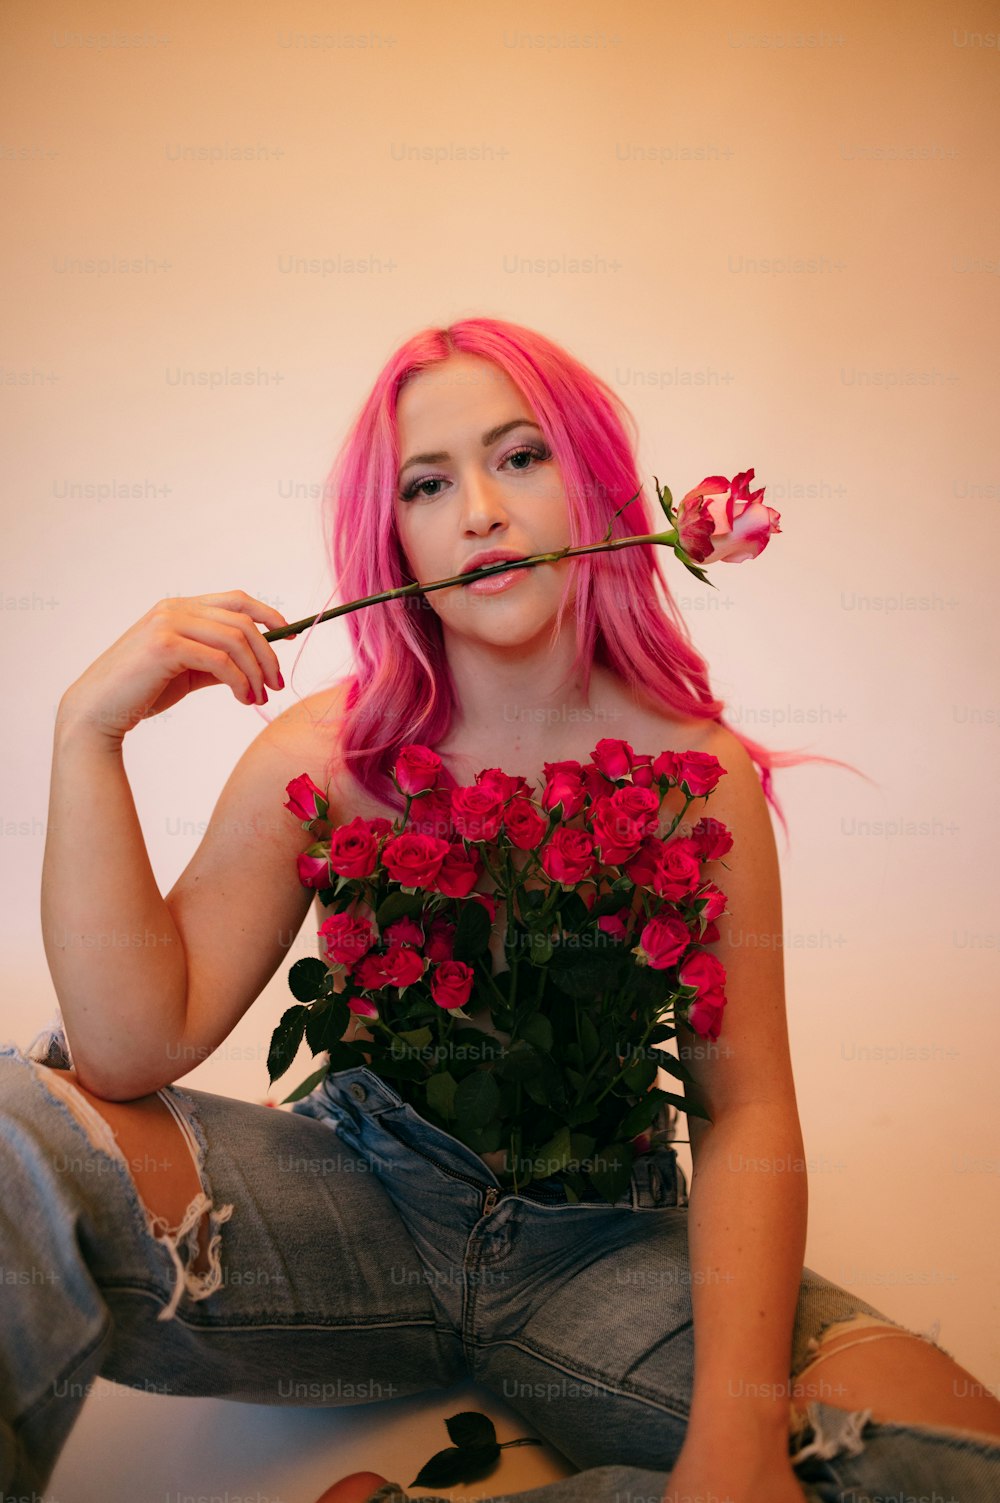 a woman with pink hair holding flowers